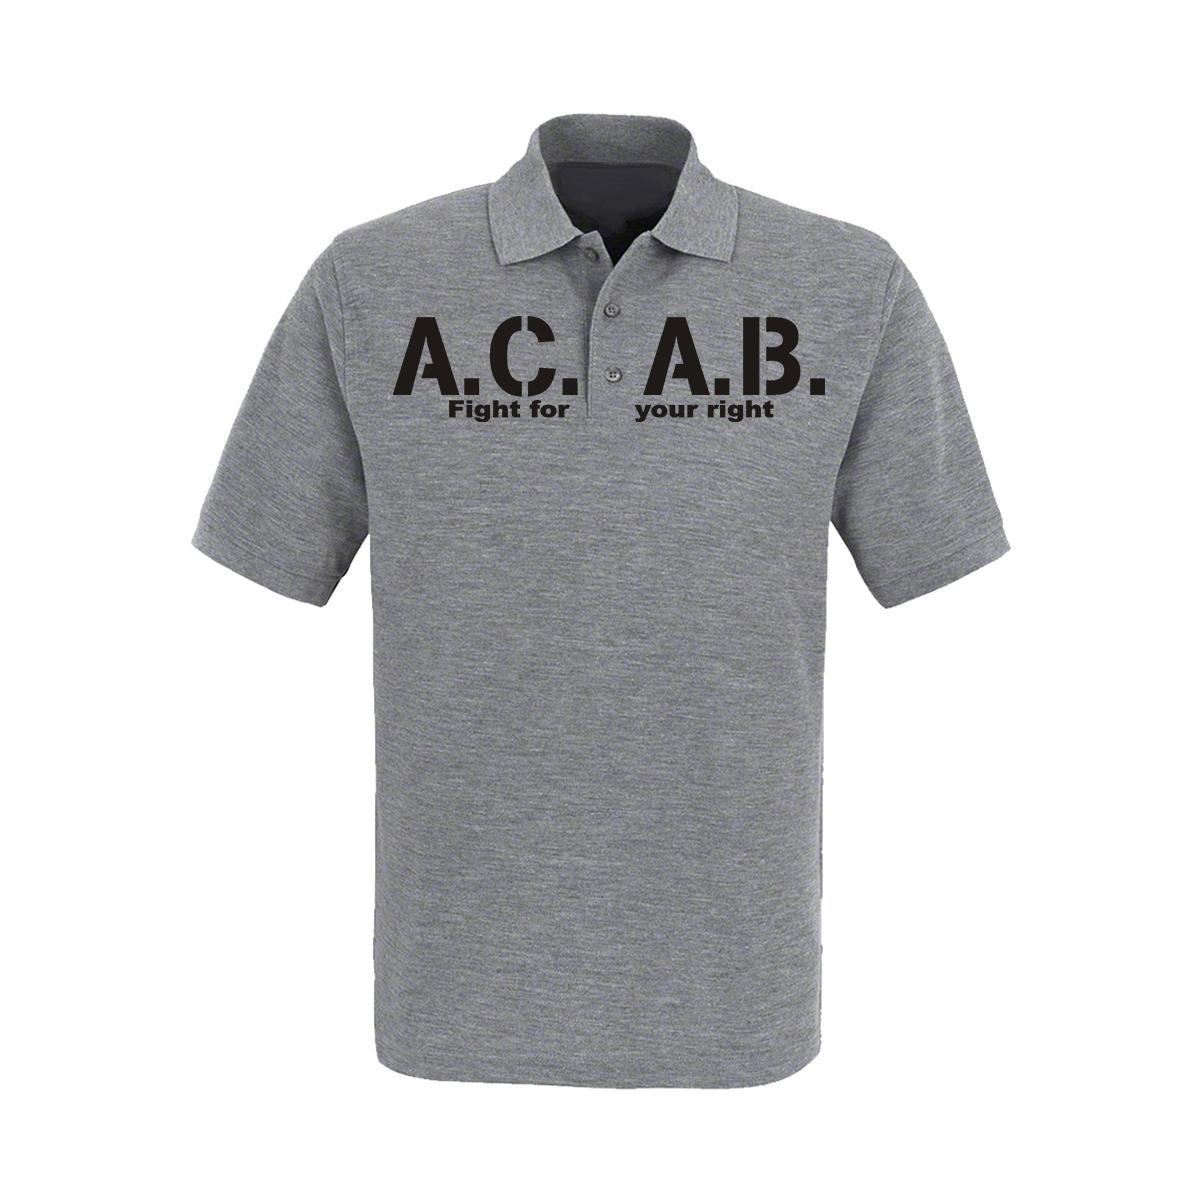 ACAB - Männer Polo Shirt - Fight for your right - grau